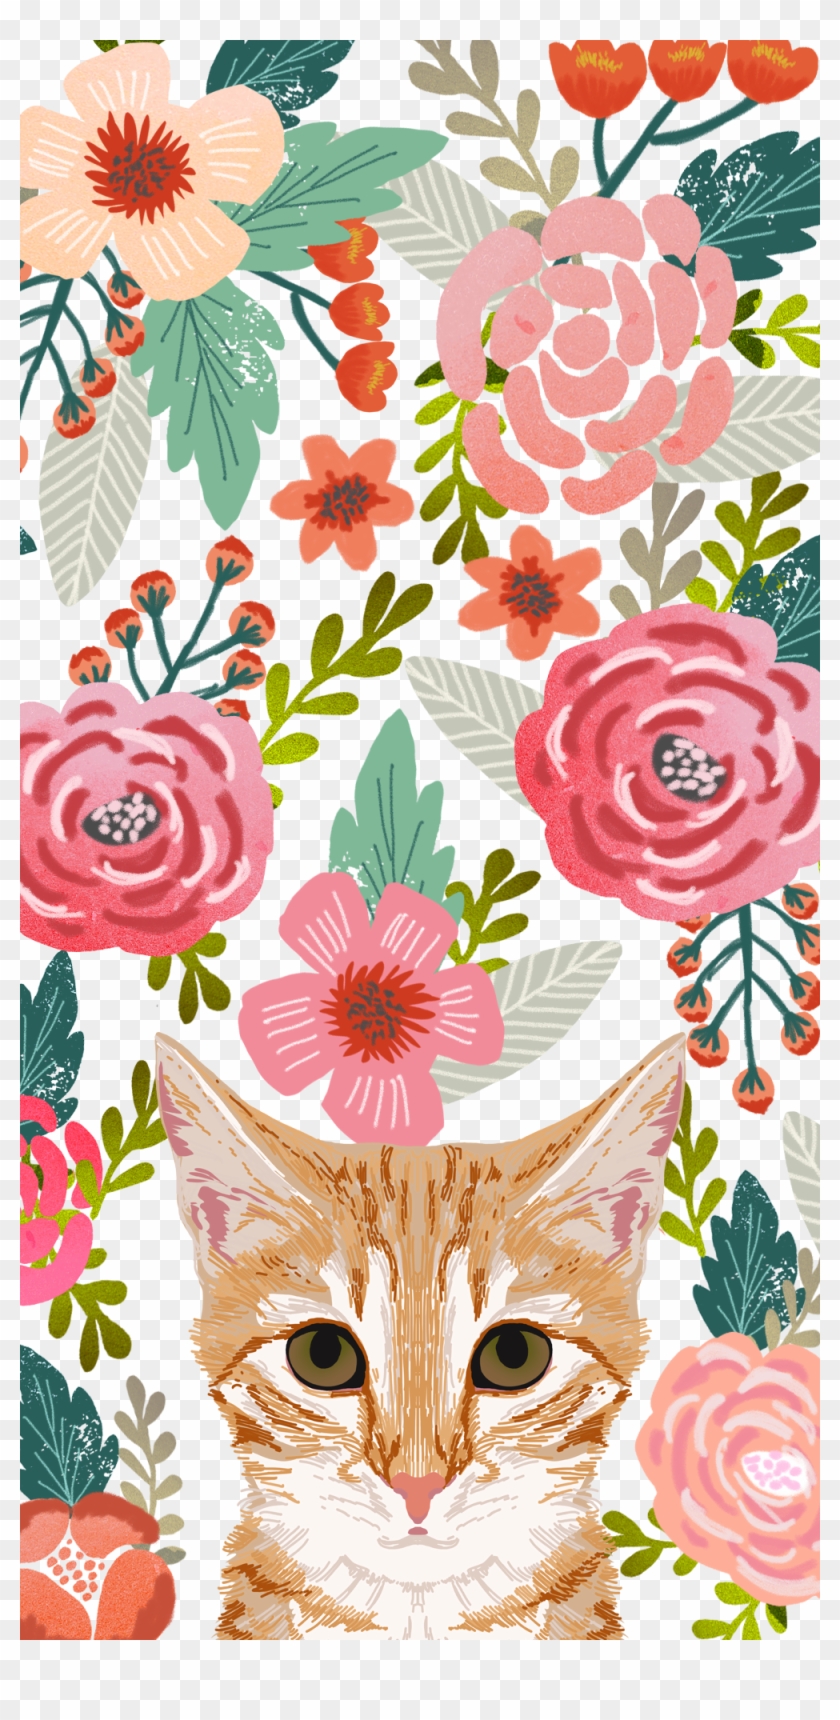 #cats #floral #crown - Dogs Floral Clipart #2605912